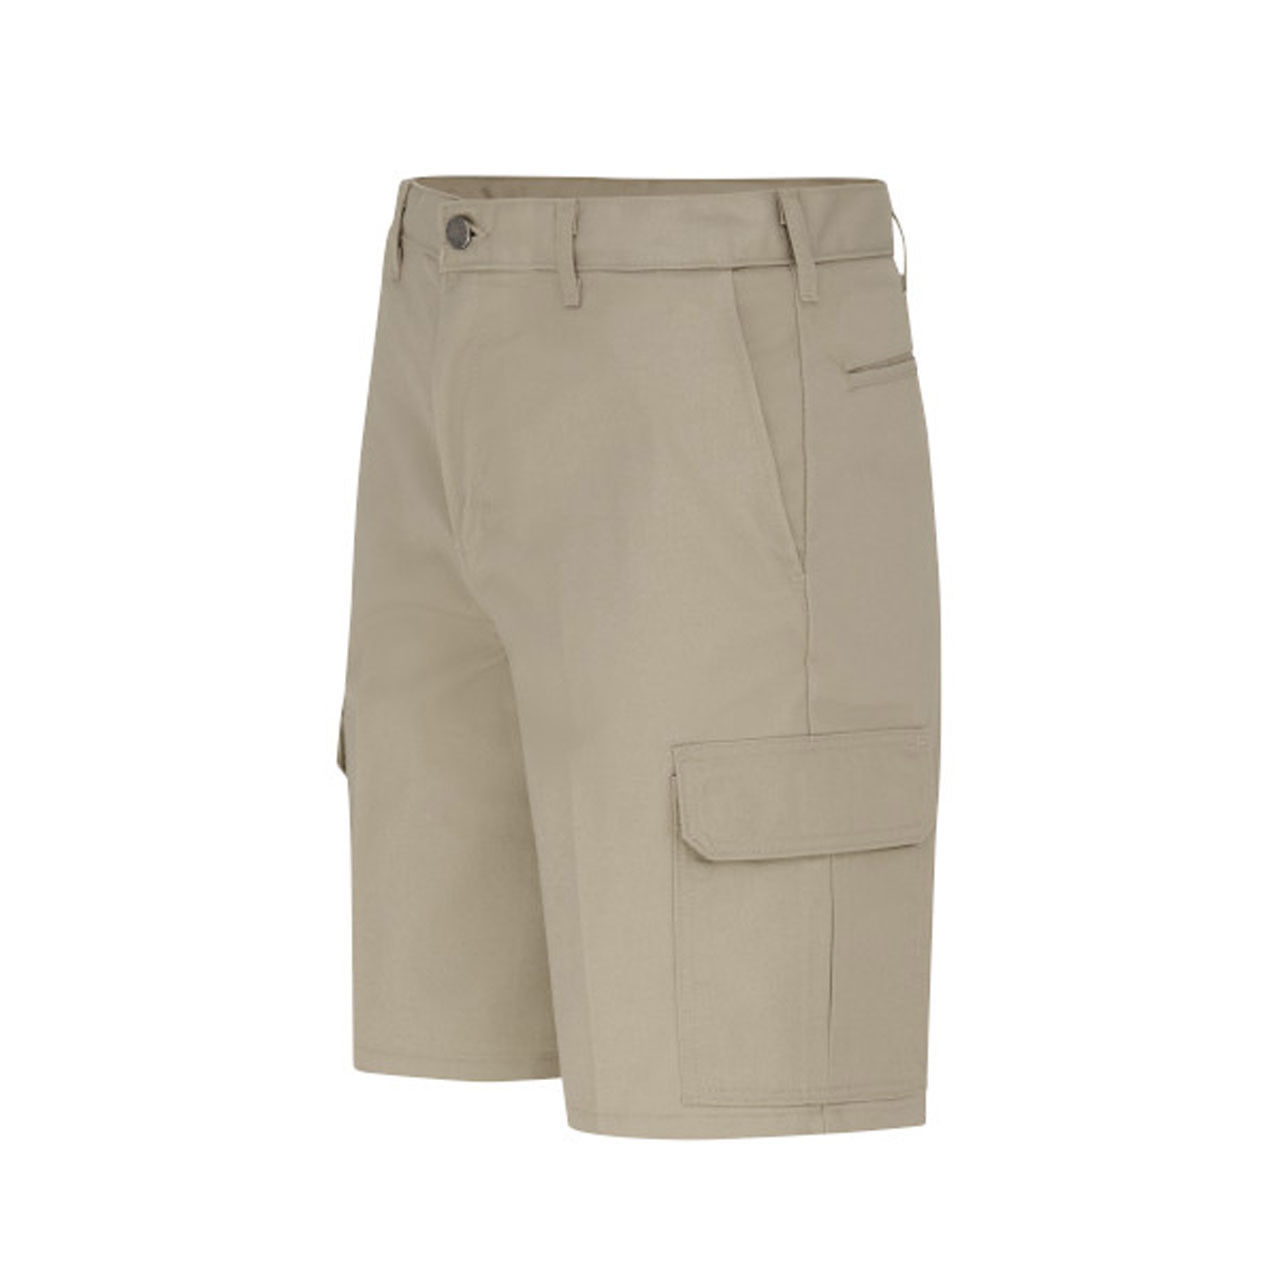 What color options are there for the Dickies Industrial Cargo Short - LR00 dickies cargo shorts?